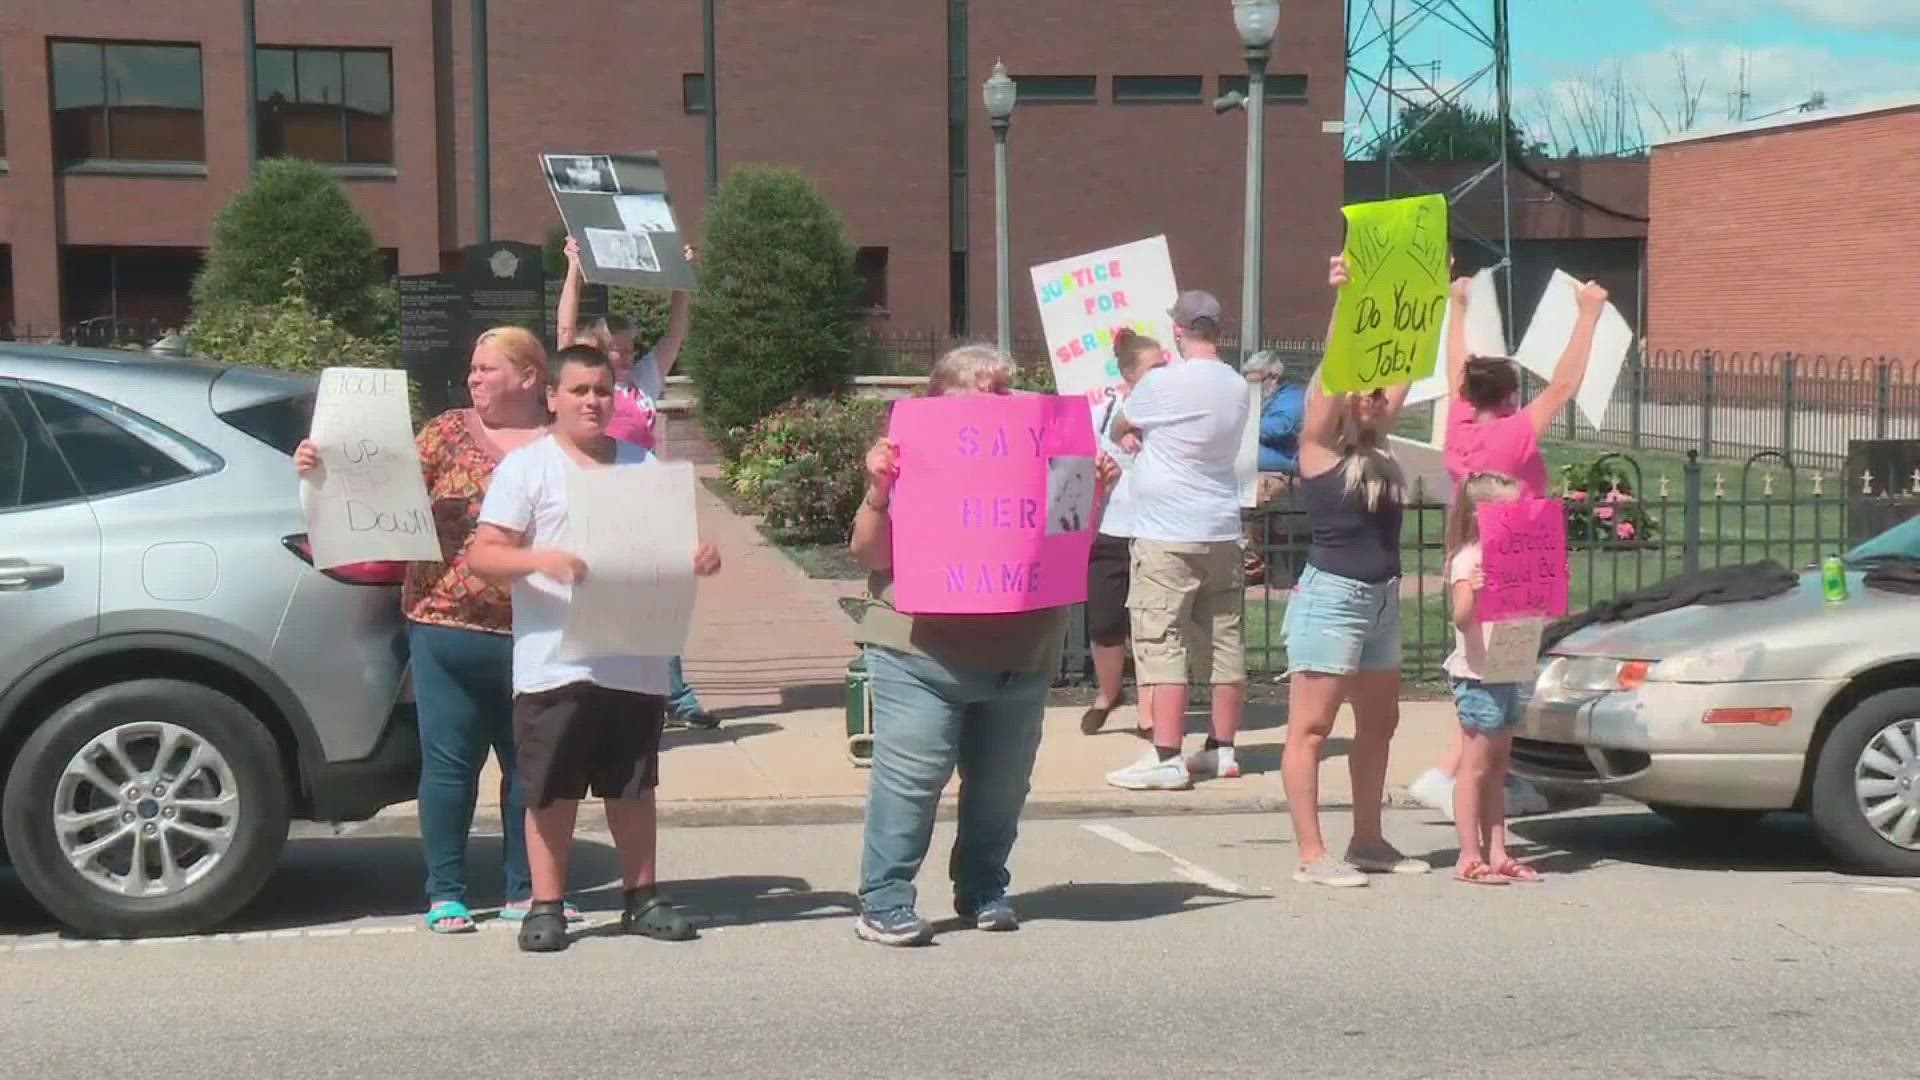 The protest is occurring in front of the office of Ashtabula County Prosecutor Colleen O'Toole.